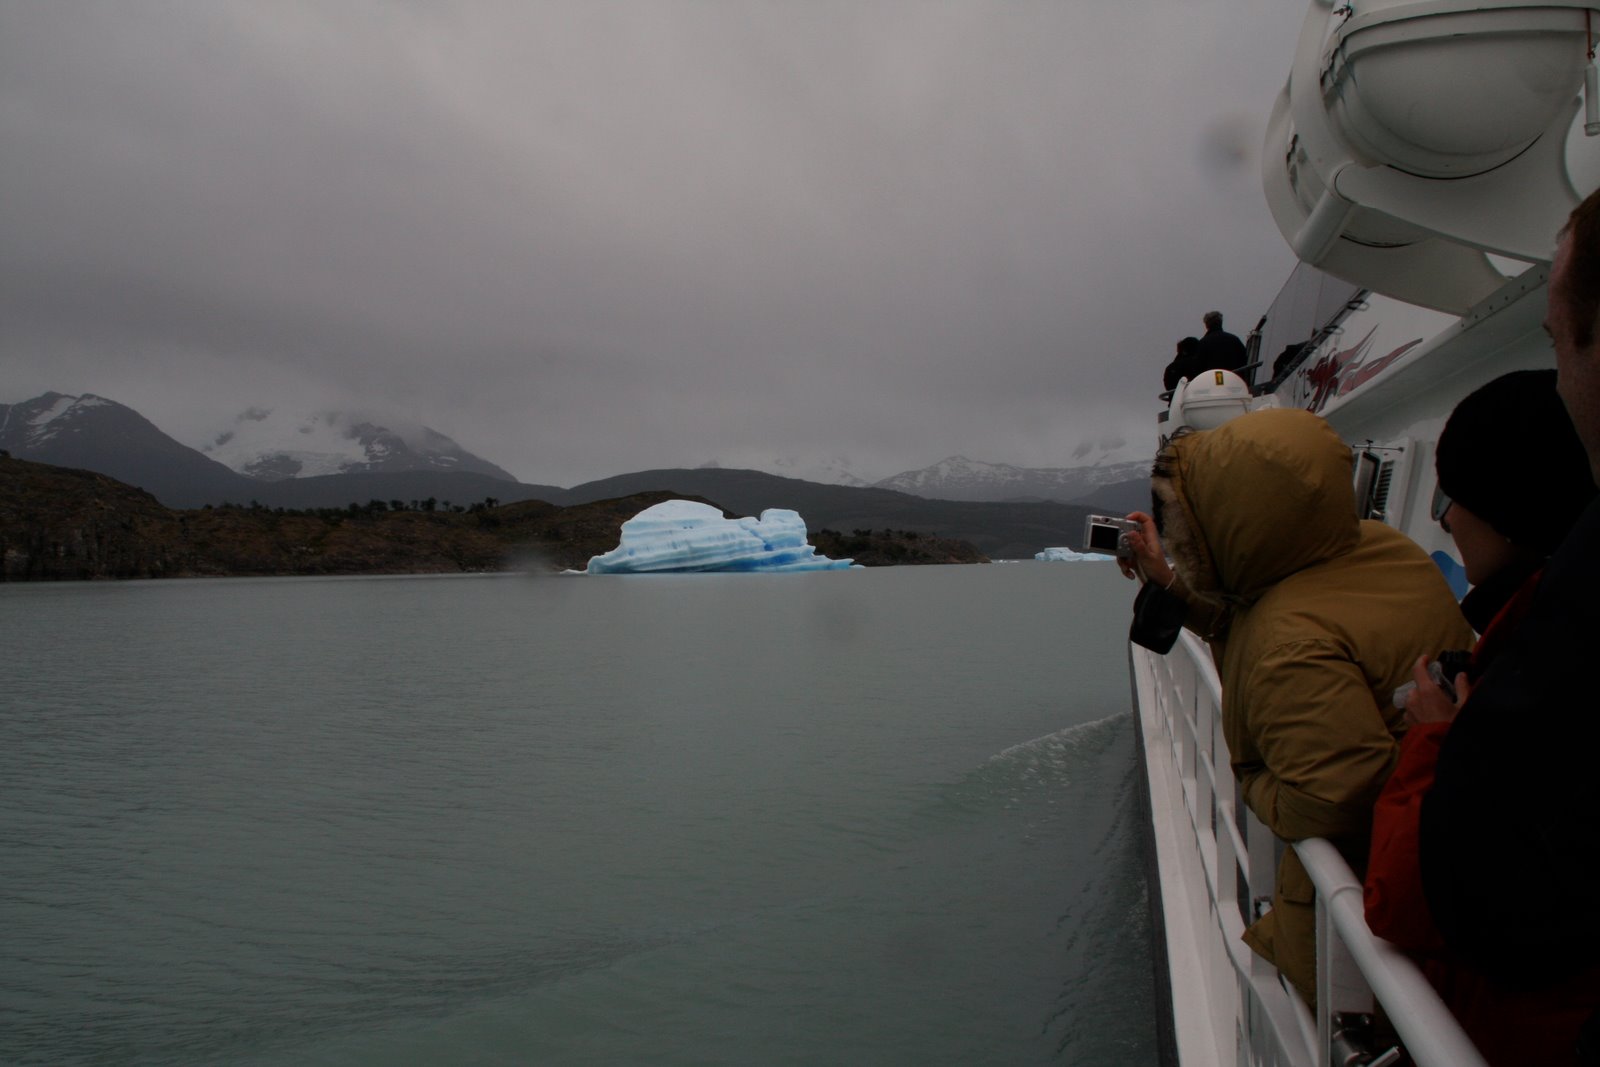 photographing the 1st iceberg without knowing we will see so many and so big later